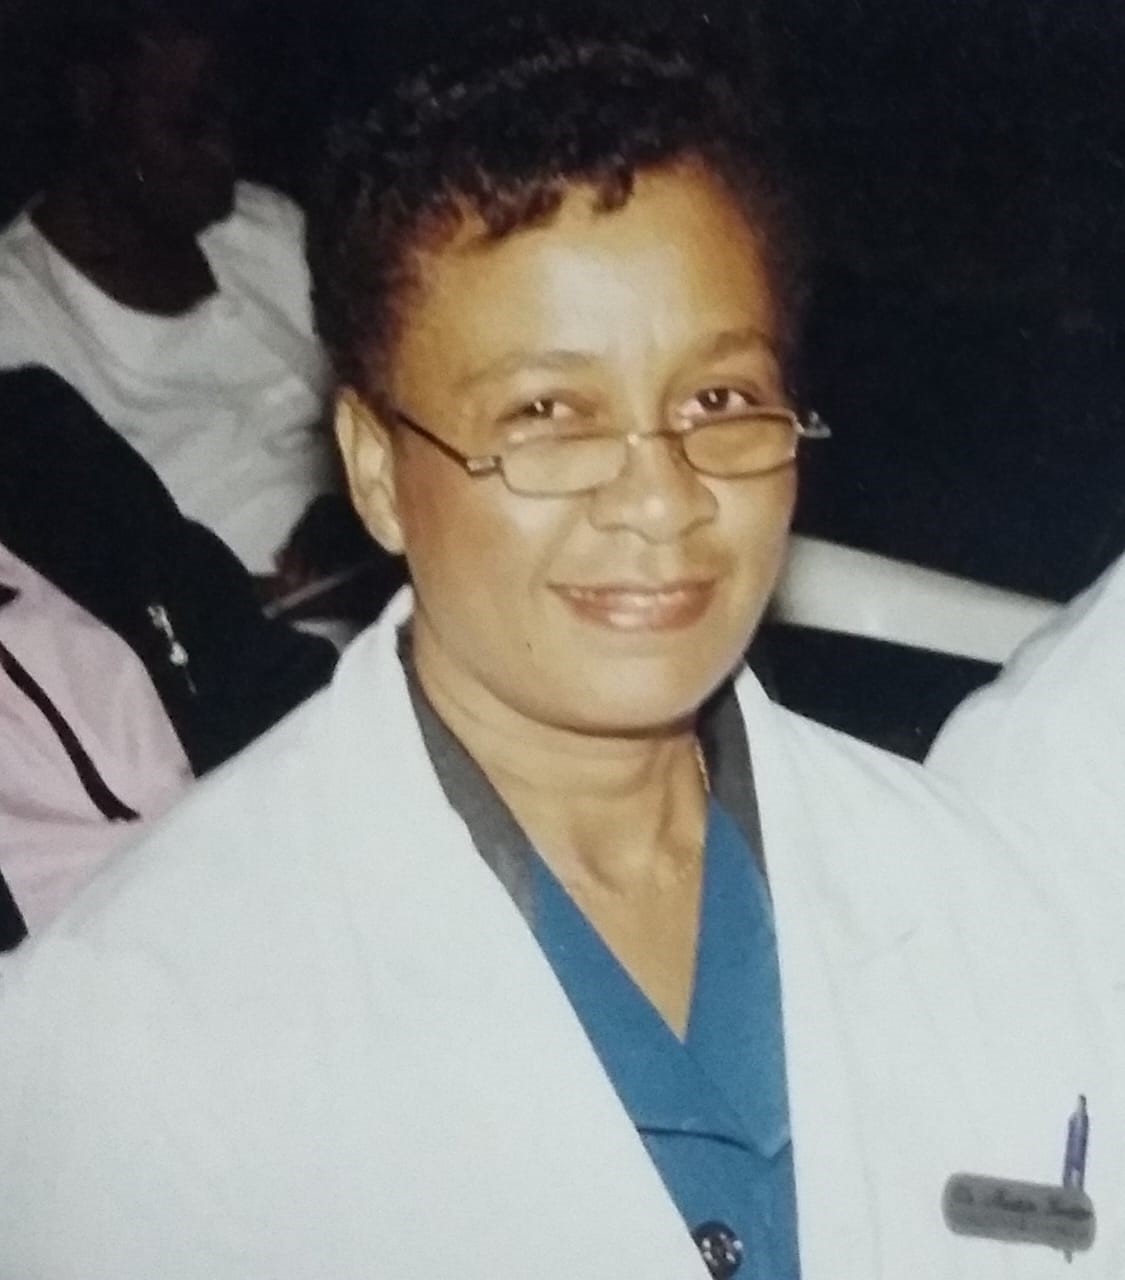 MODUPE MARTHA-ALICE LADIPO OF THE CoMUI GRADUATING  CLASS OF 1977 WINS WONCA’S FIVE STAR DOCTOR AWARD 